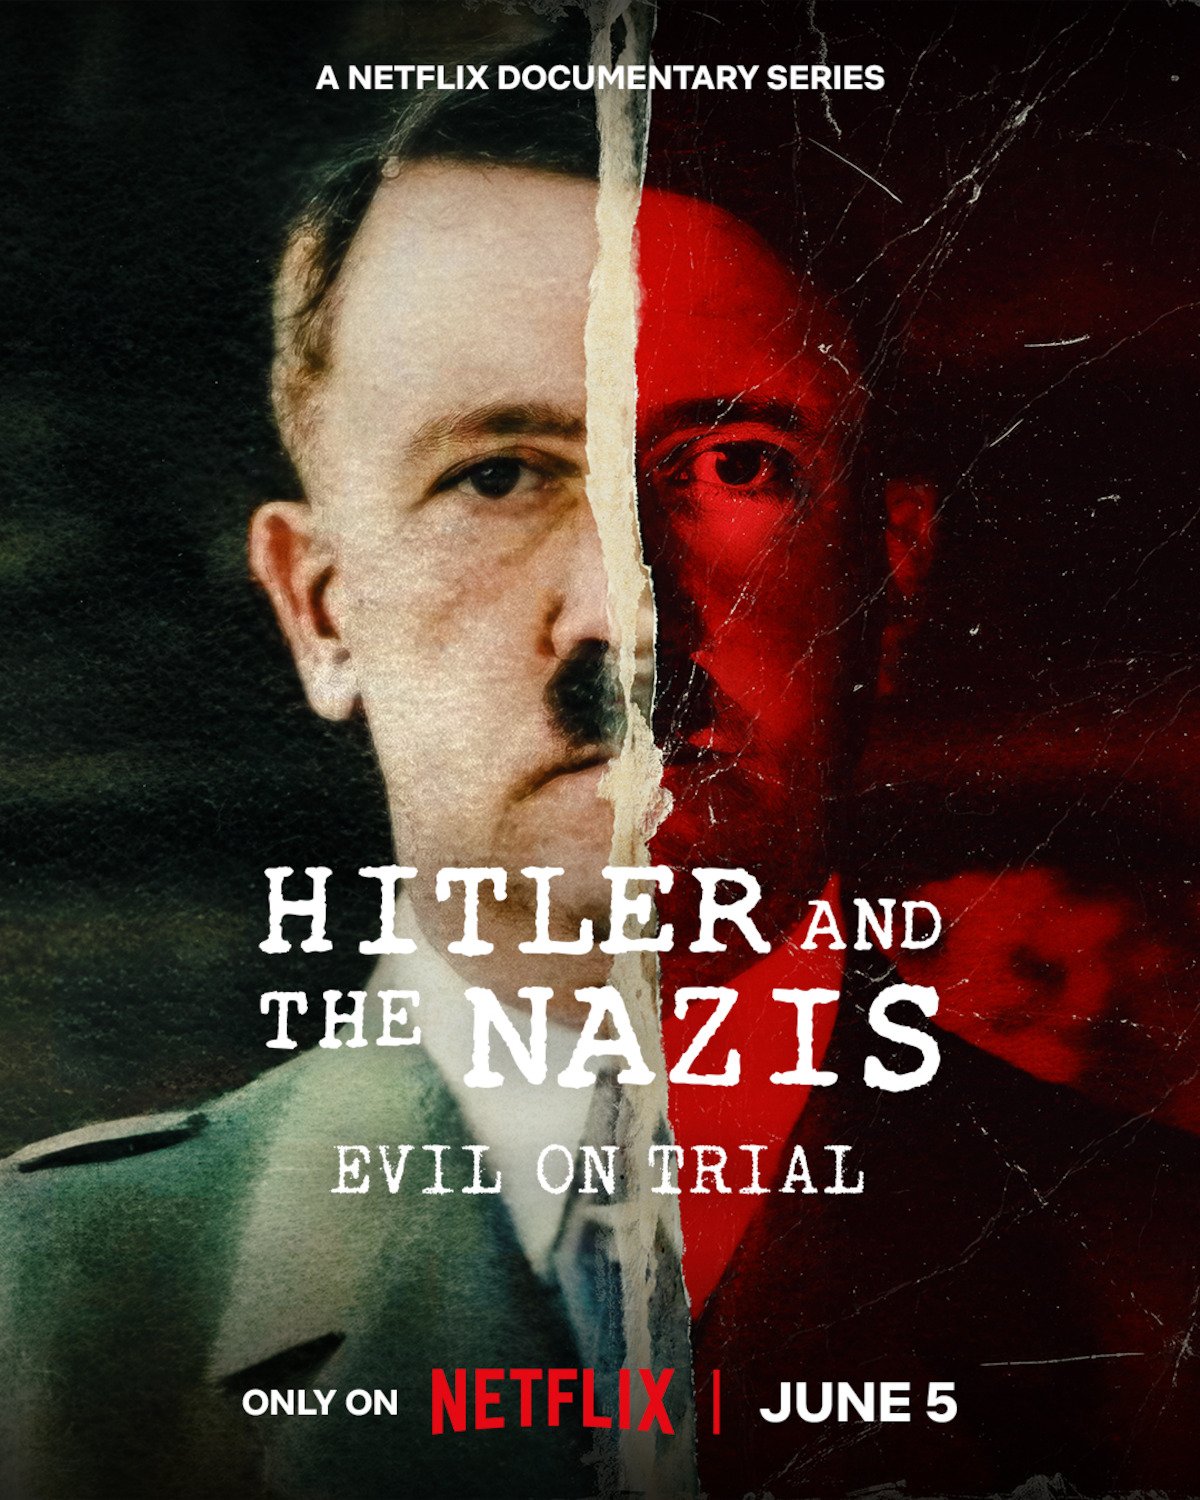 Trailer Unveiled For Netflix's 'Hitler and the Nazis: Evil on Trial'